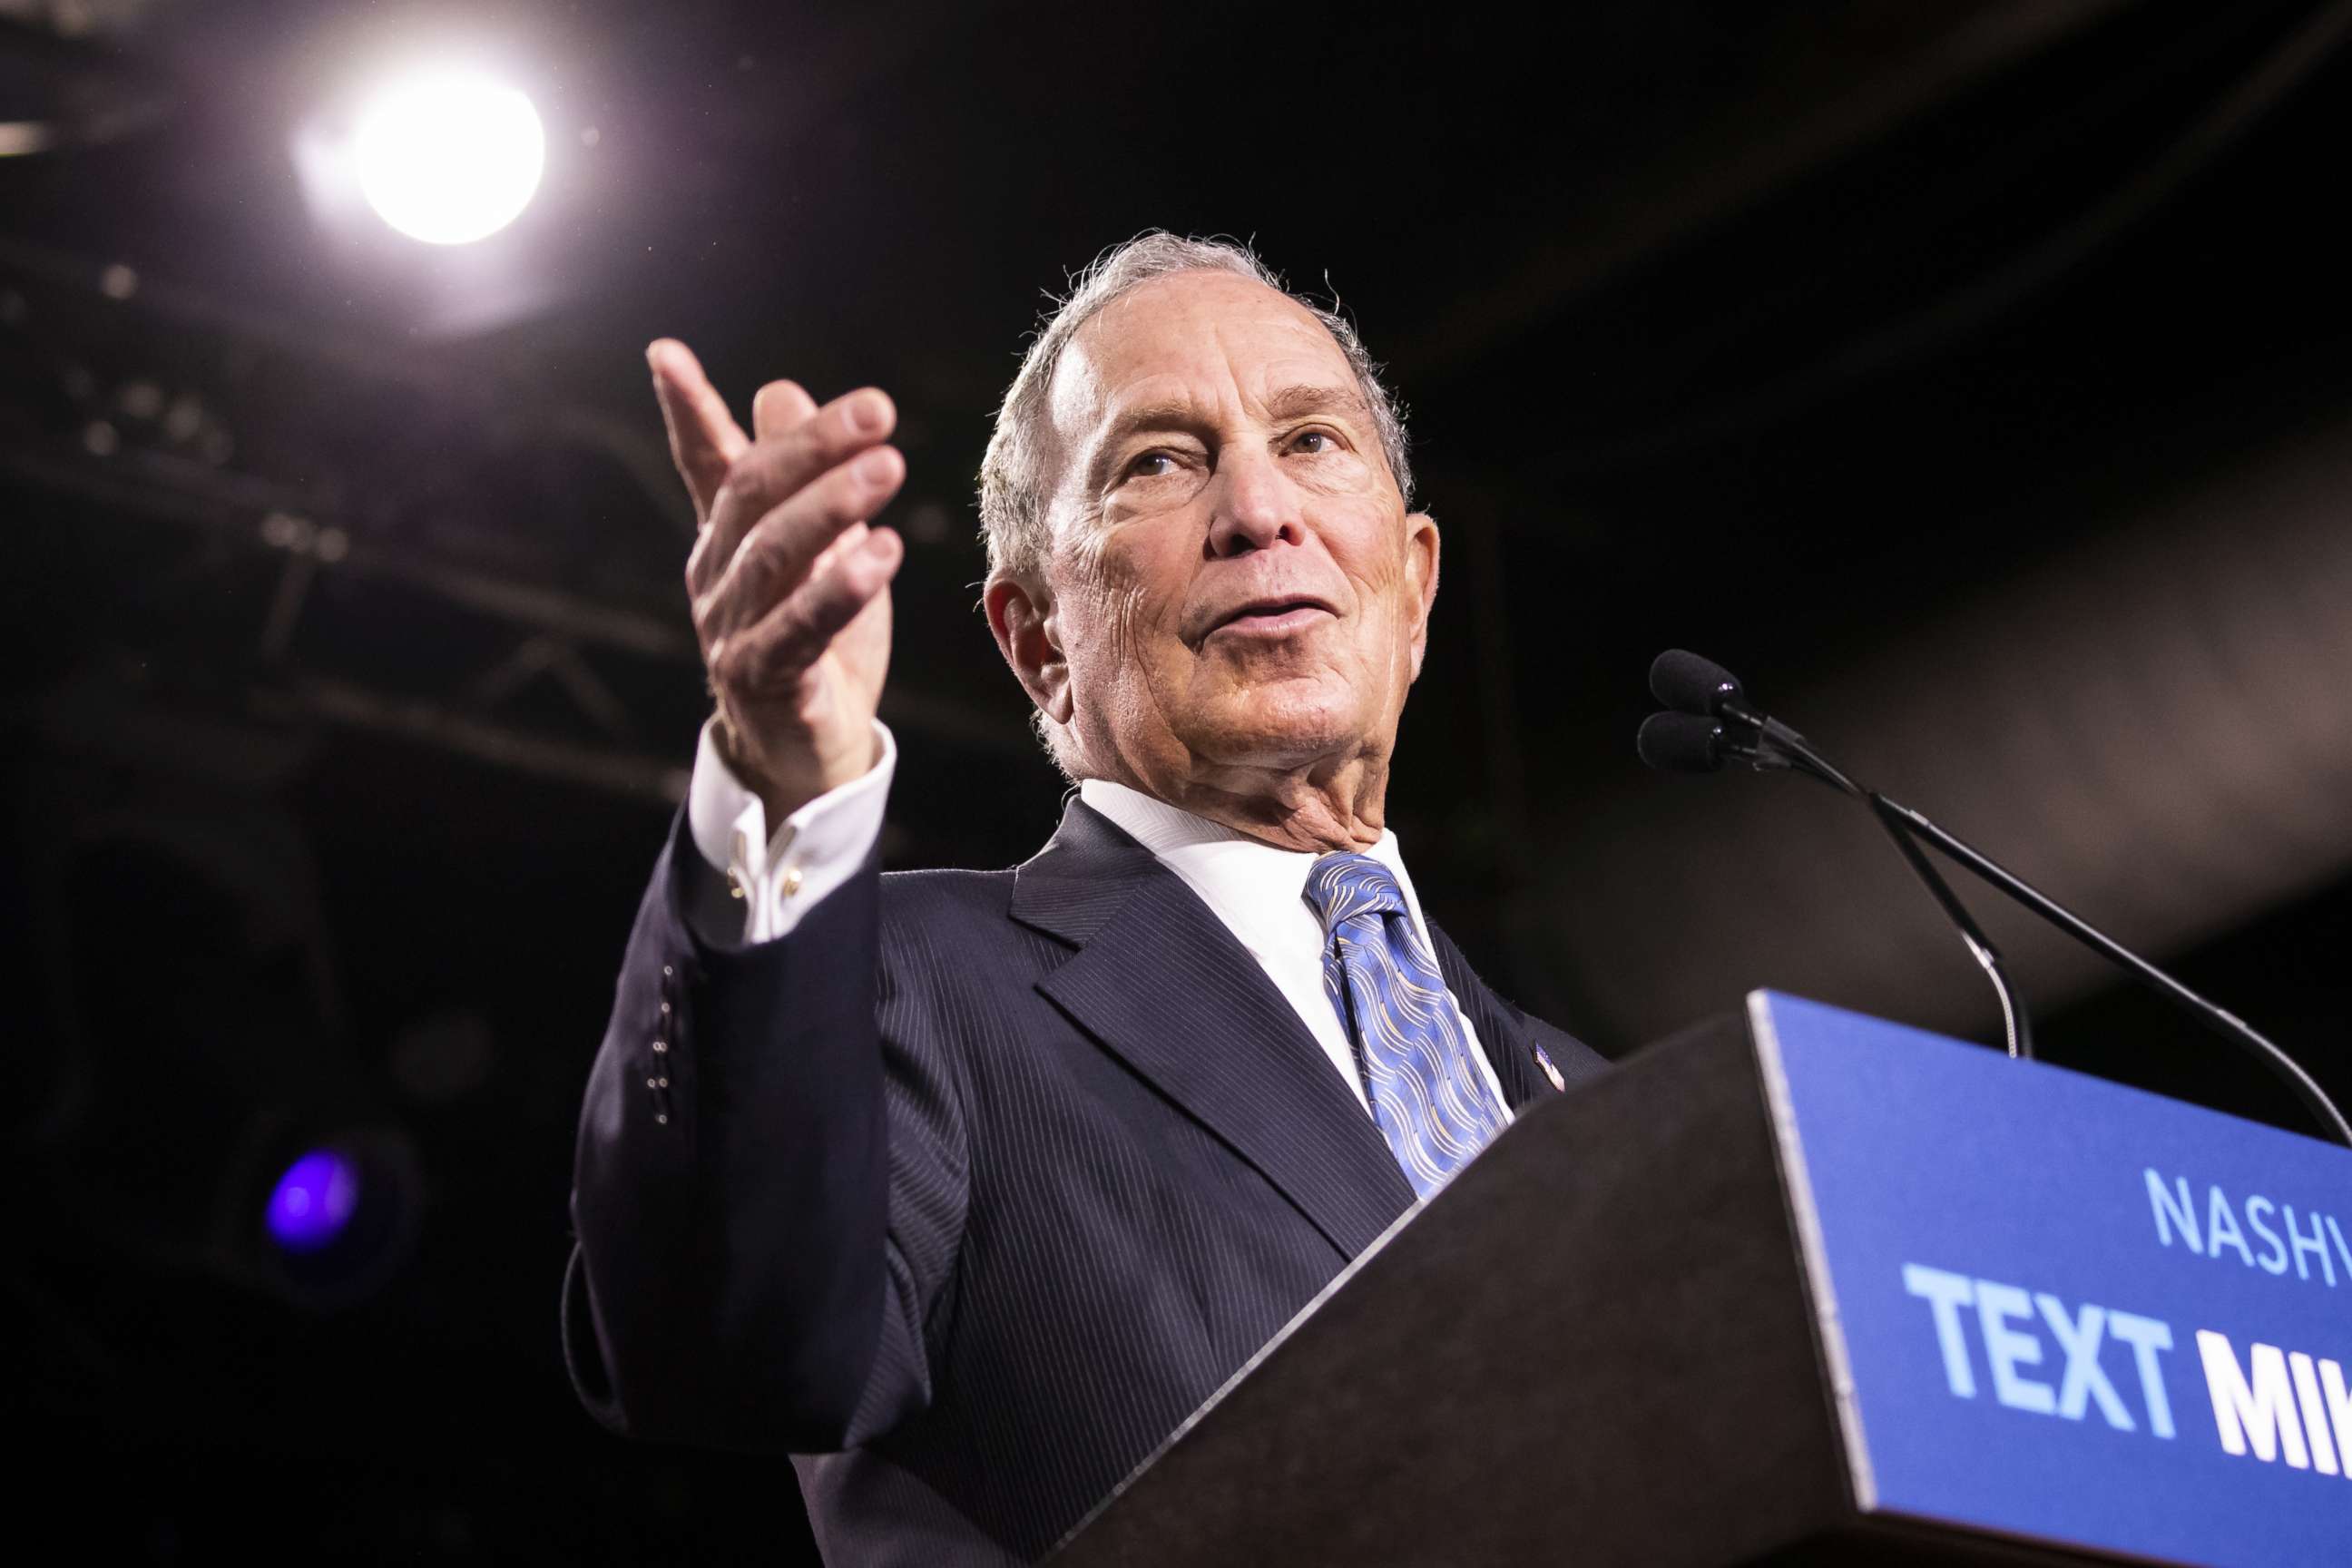 PHOTO: Democratic presidential candidate former New York City Mayor Mike Bloomberg delivers remarks during a campaign rally on Feb. 12, 2020, in Nashville, Tenn.